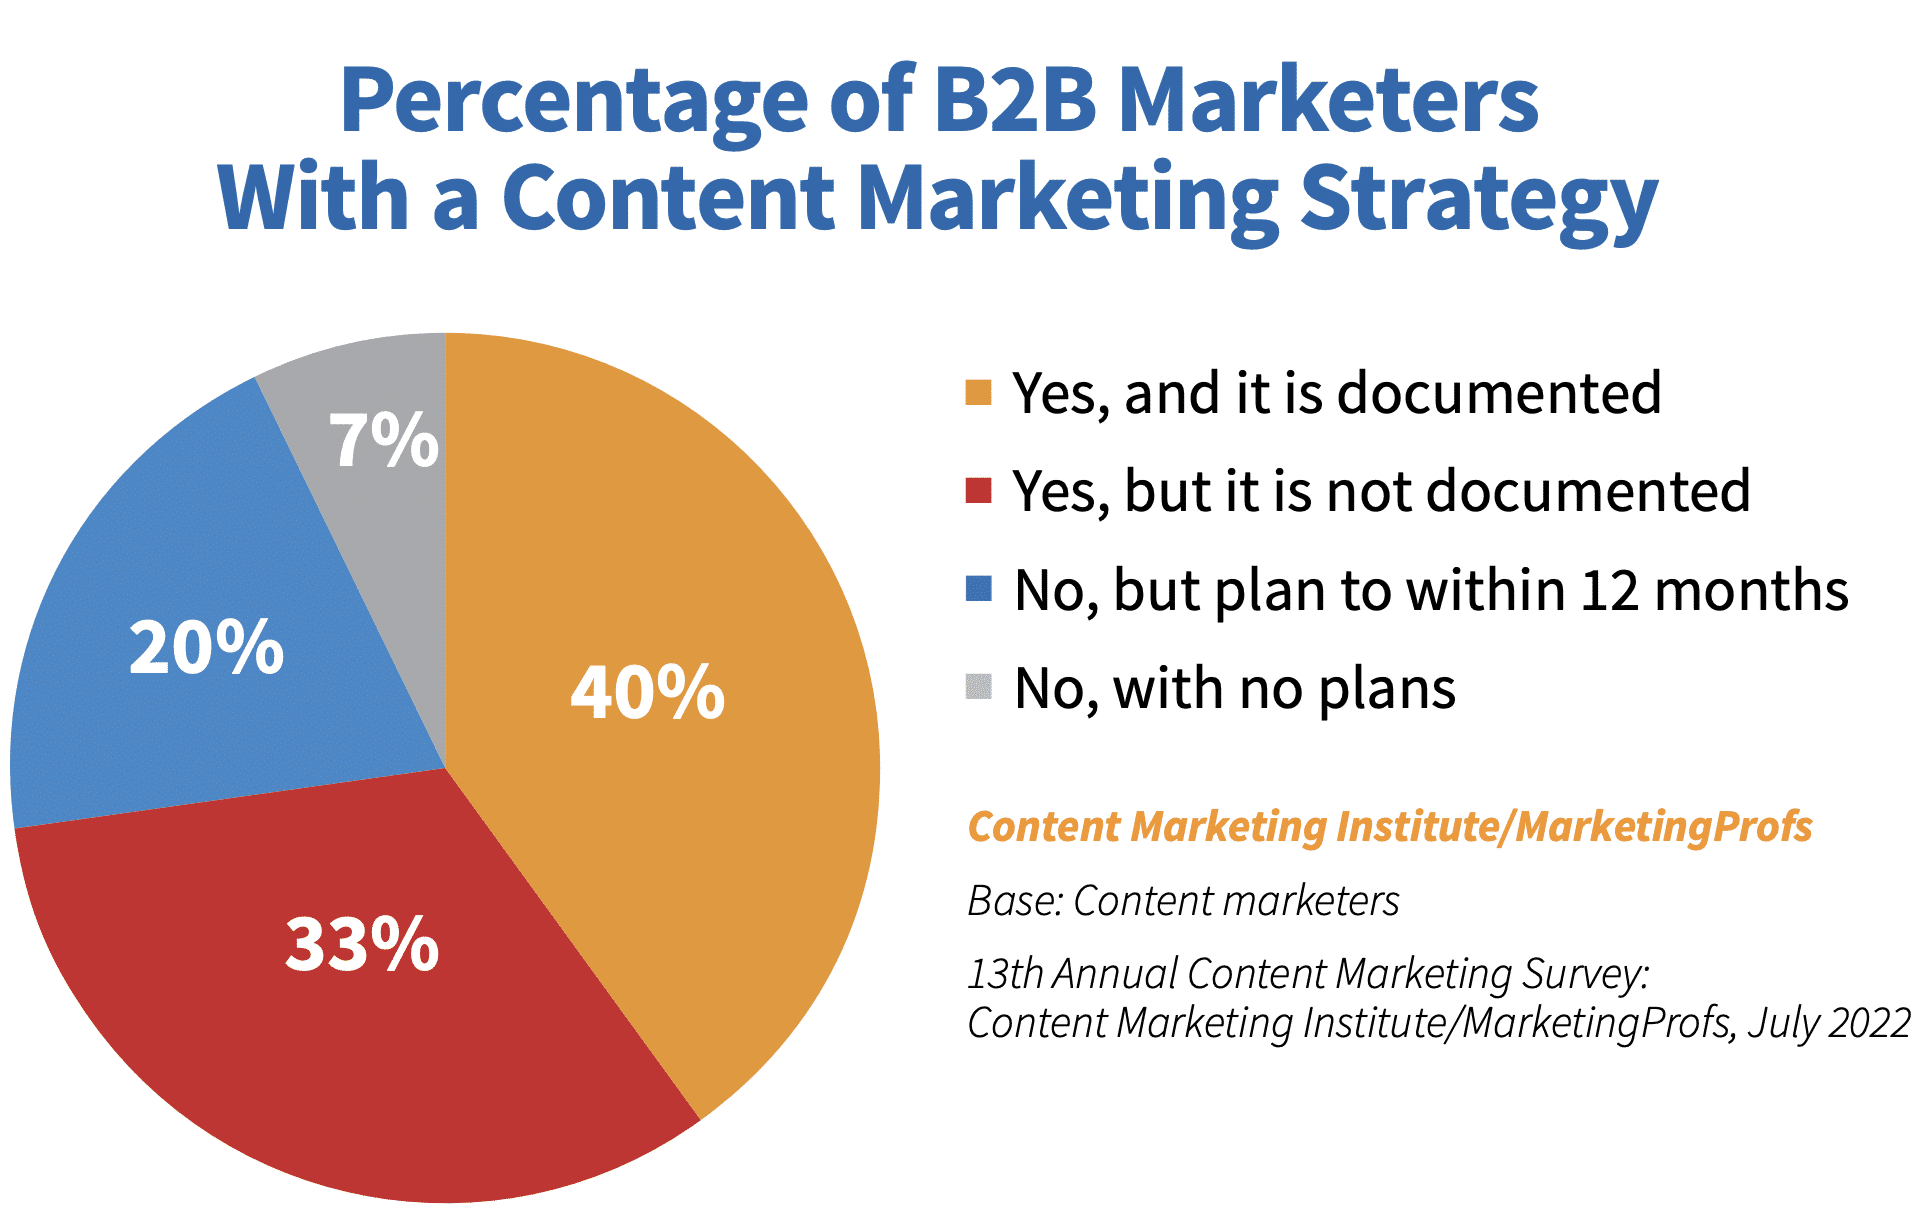 graph shows that 33% of content marketers do not have a documented content marketing strategy